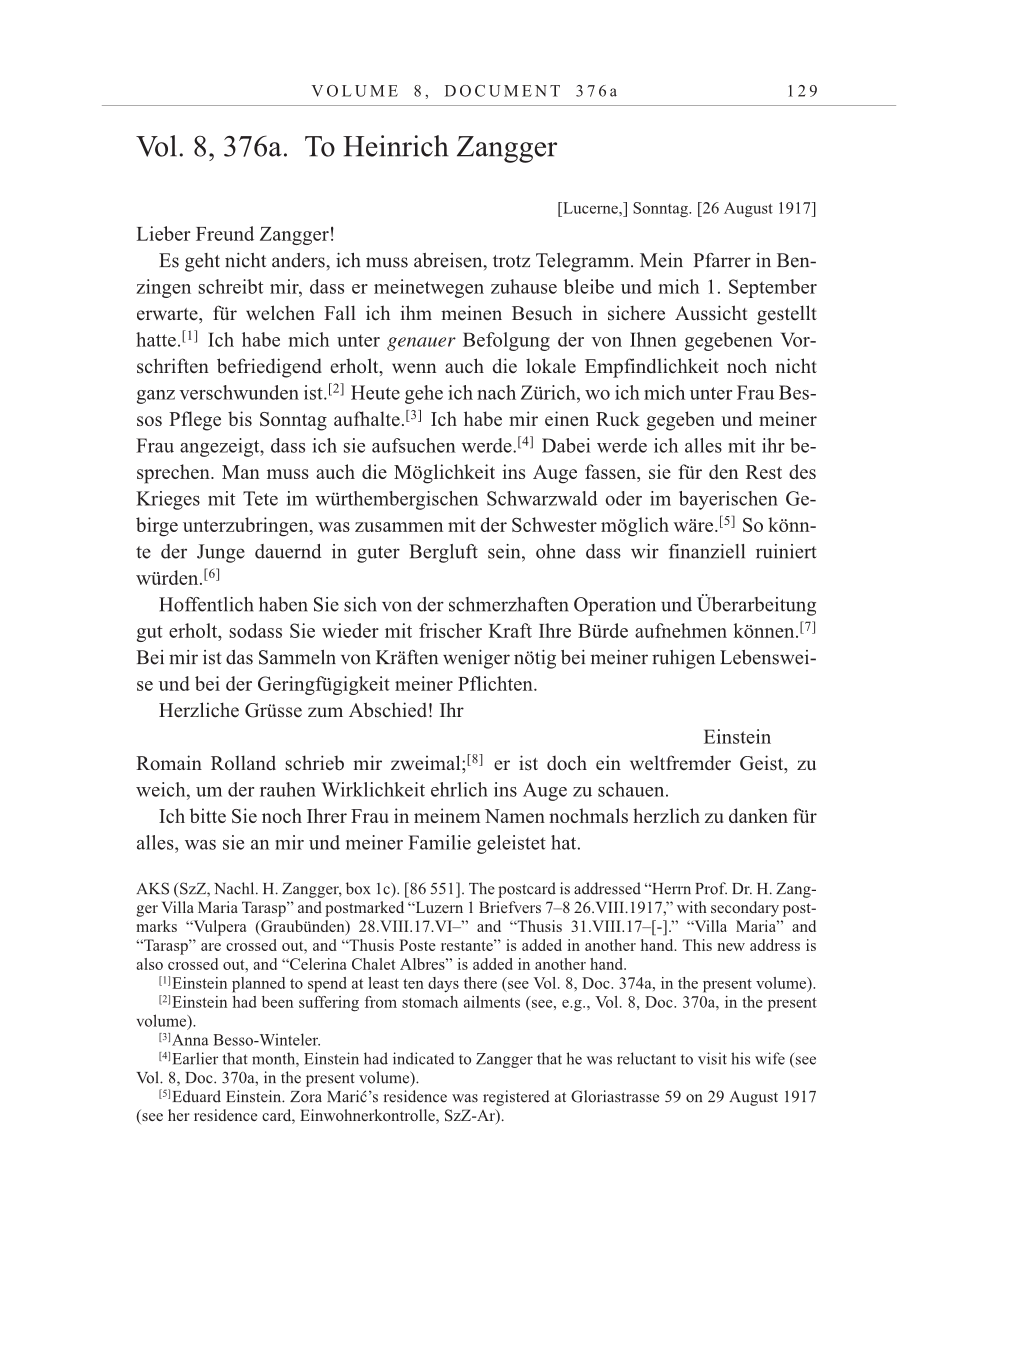 Volume 10: The Berlin Years: Correspondence May-December 1920 / Supplementary Correspondence 1909-1920 page 129